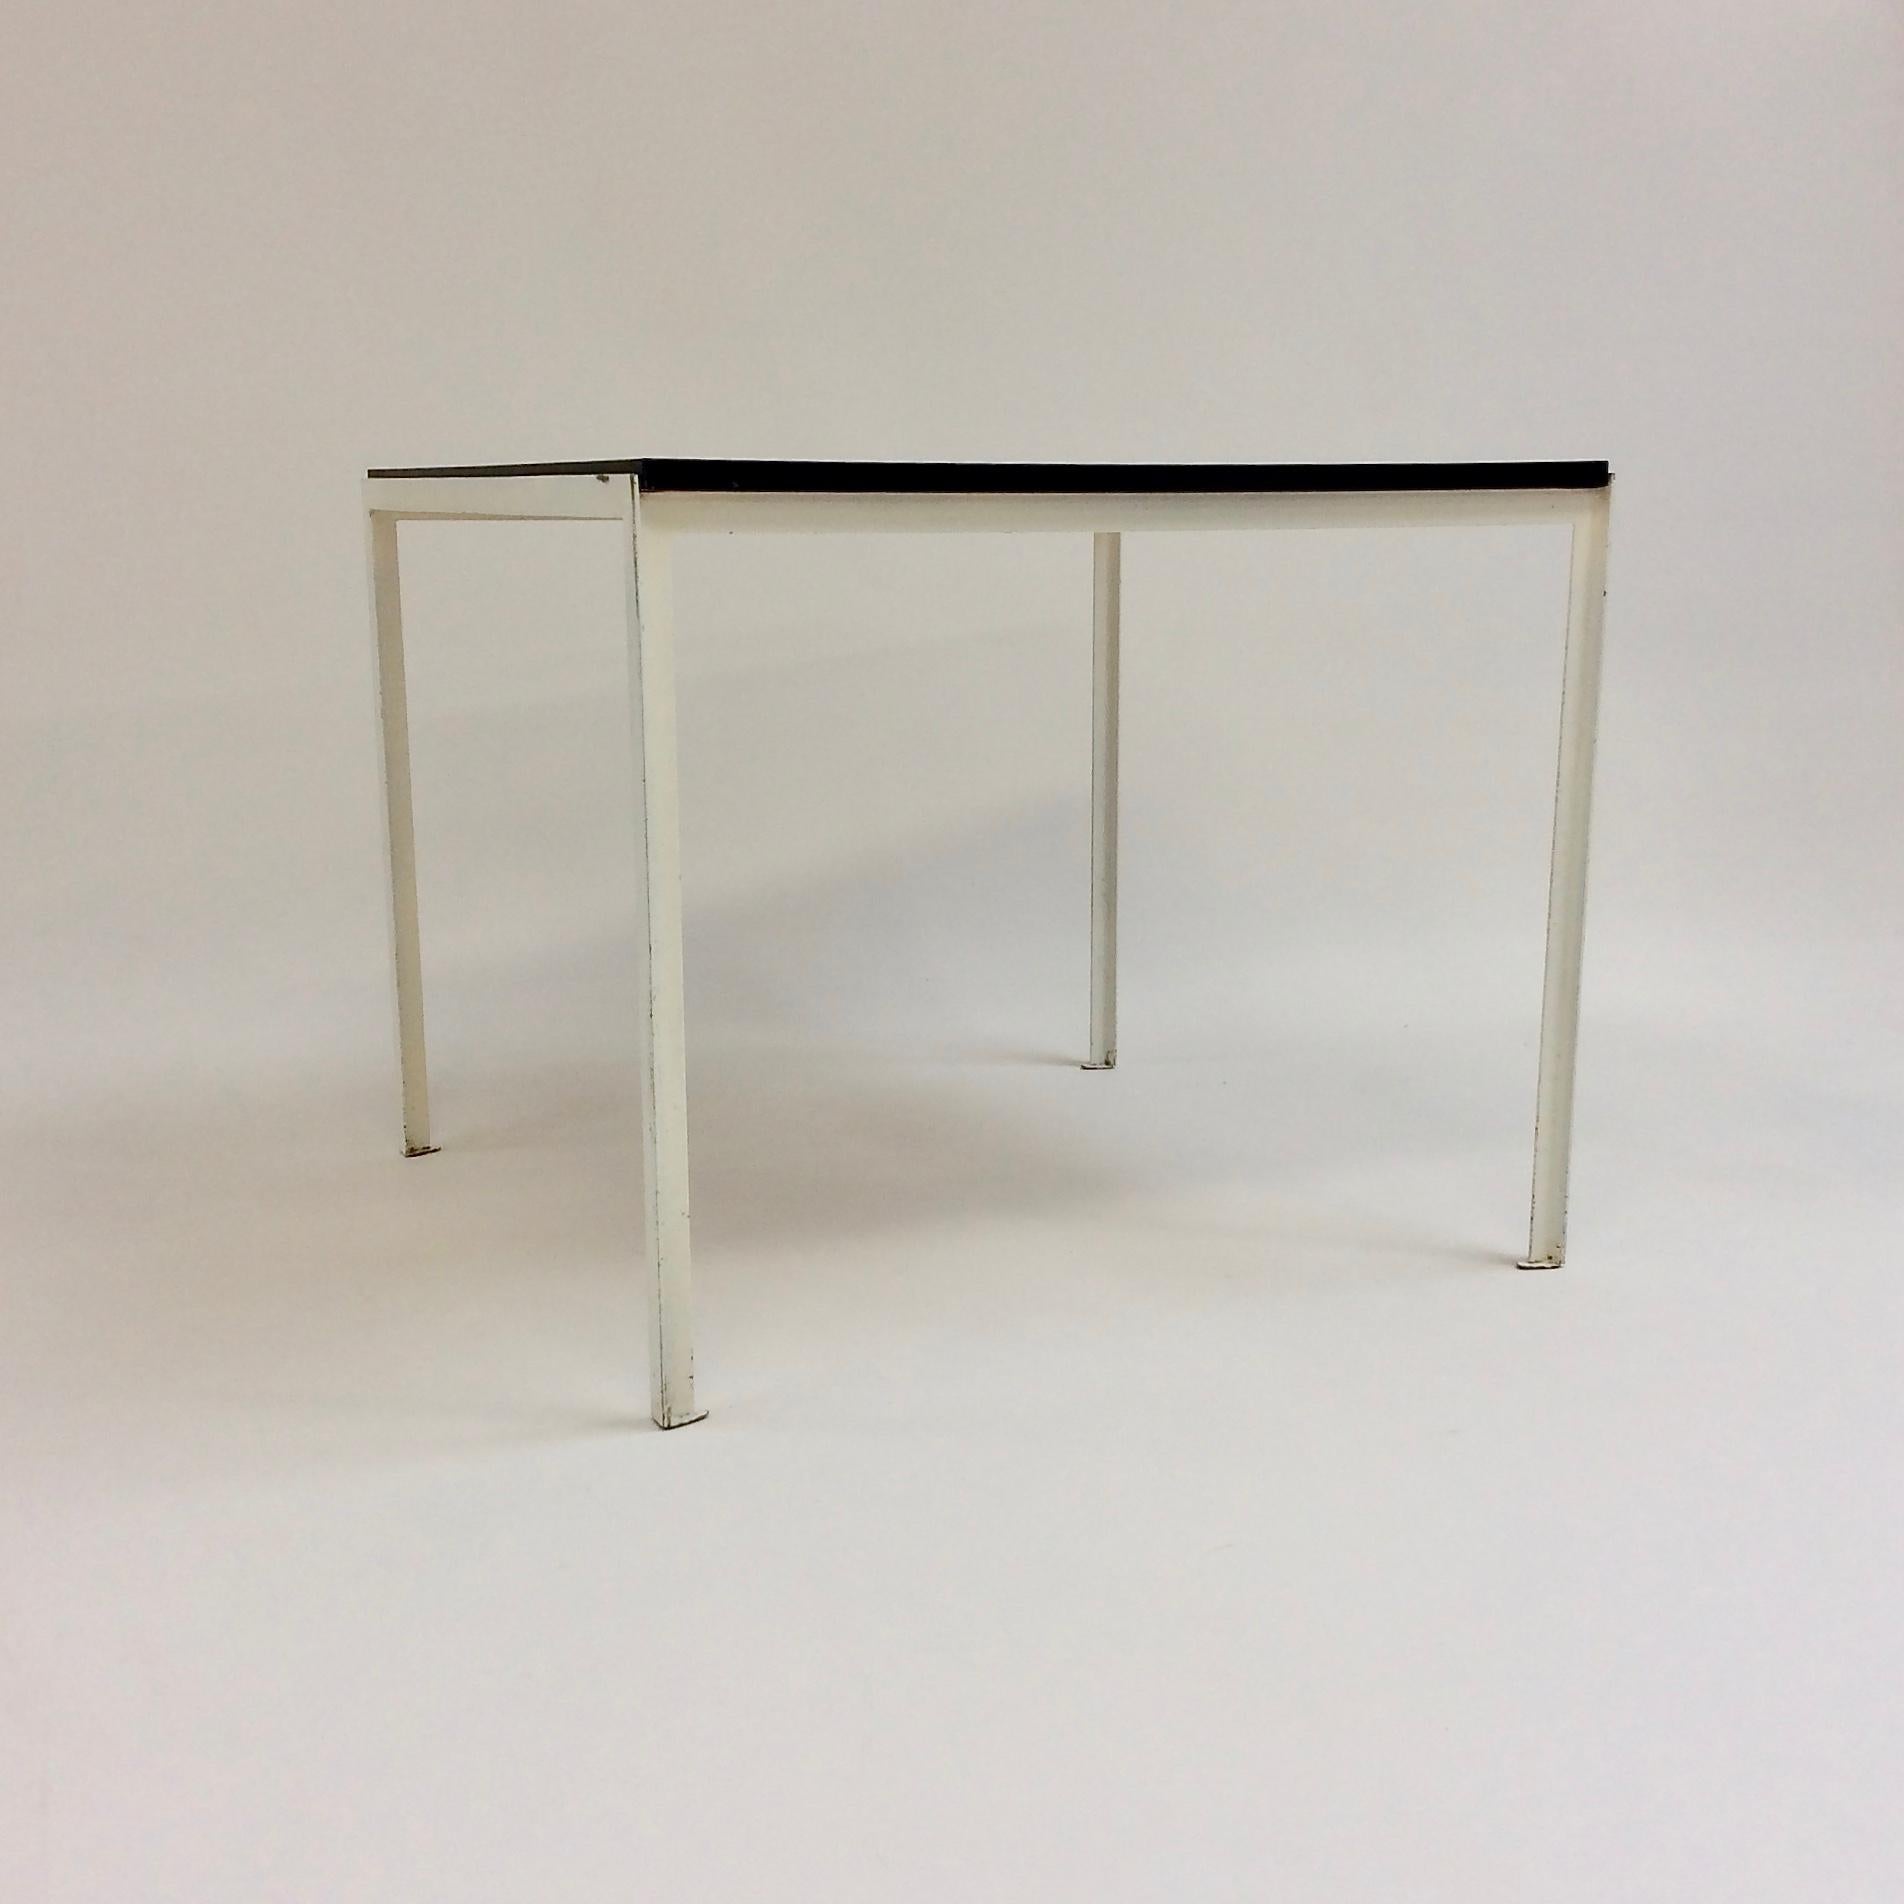 Florence Knoll dining table for Knoll International, circa 1950.
Original black laminate top on original white lacquered metal structure.
Dimensions: 87 cm W, 87 cm D, 72 cm H.
All purchases are covered by our Buyer Protection Guarantee.
This